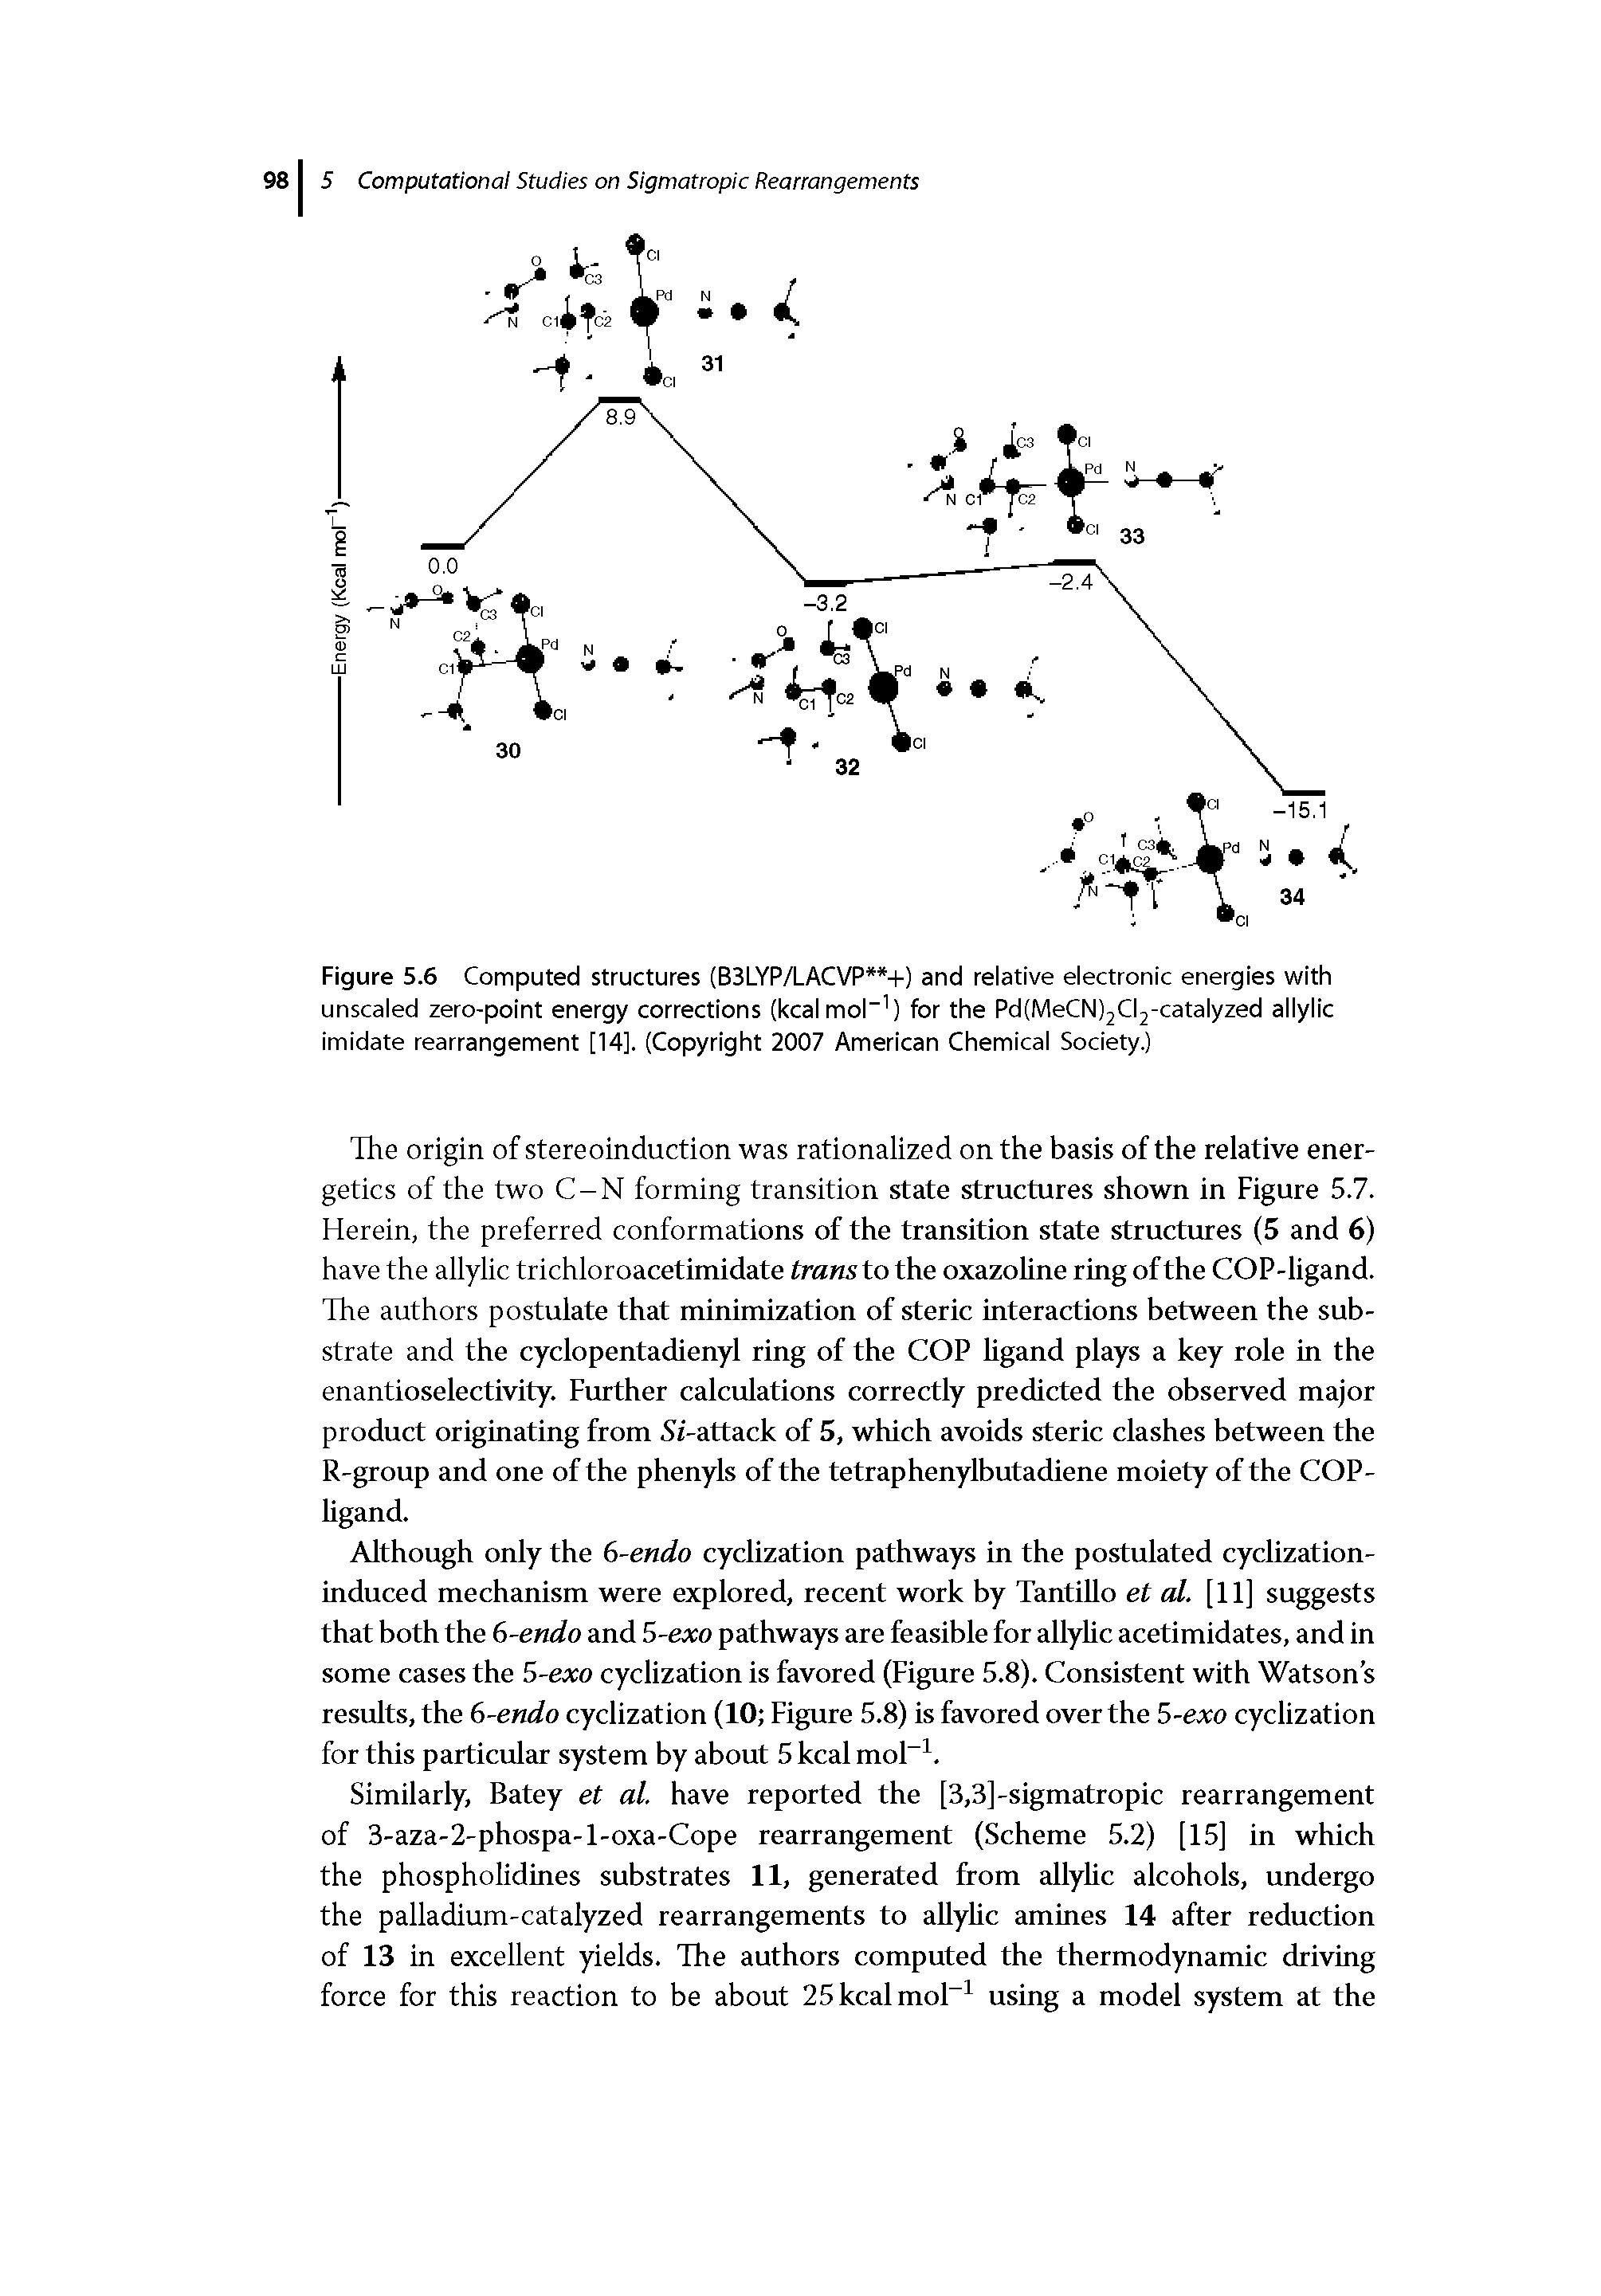 Figure 5.6 Computed structures (B3LYP/LACVP +) and relative electronic energies with unsealed zero-point energy corrections (kcalmol" ) for the PdIMeCNjjClj-catalyzed allylic imidate rearrangement [14]. (Copyright 2007 American Chemical Society.)...